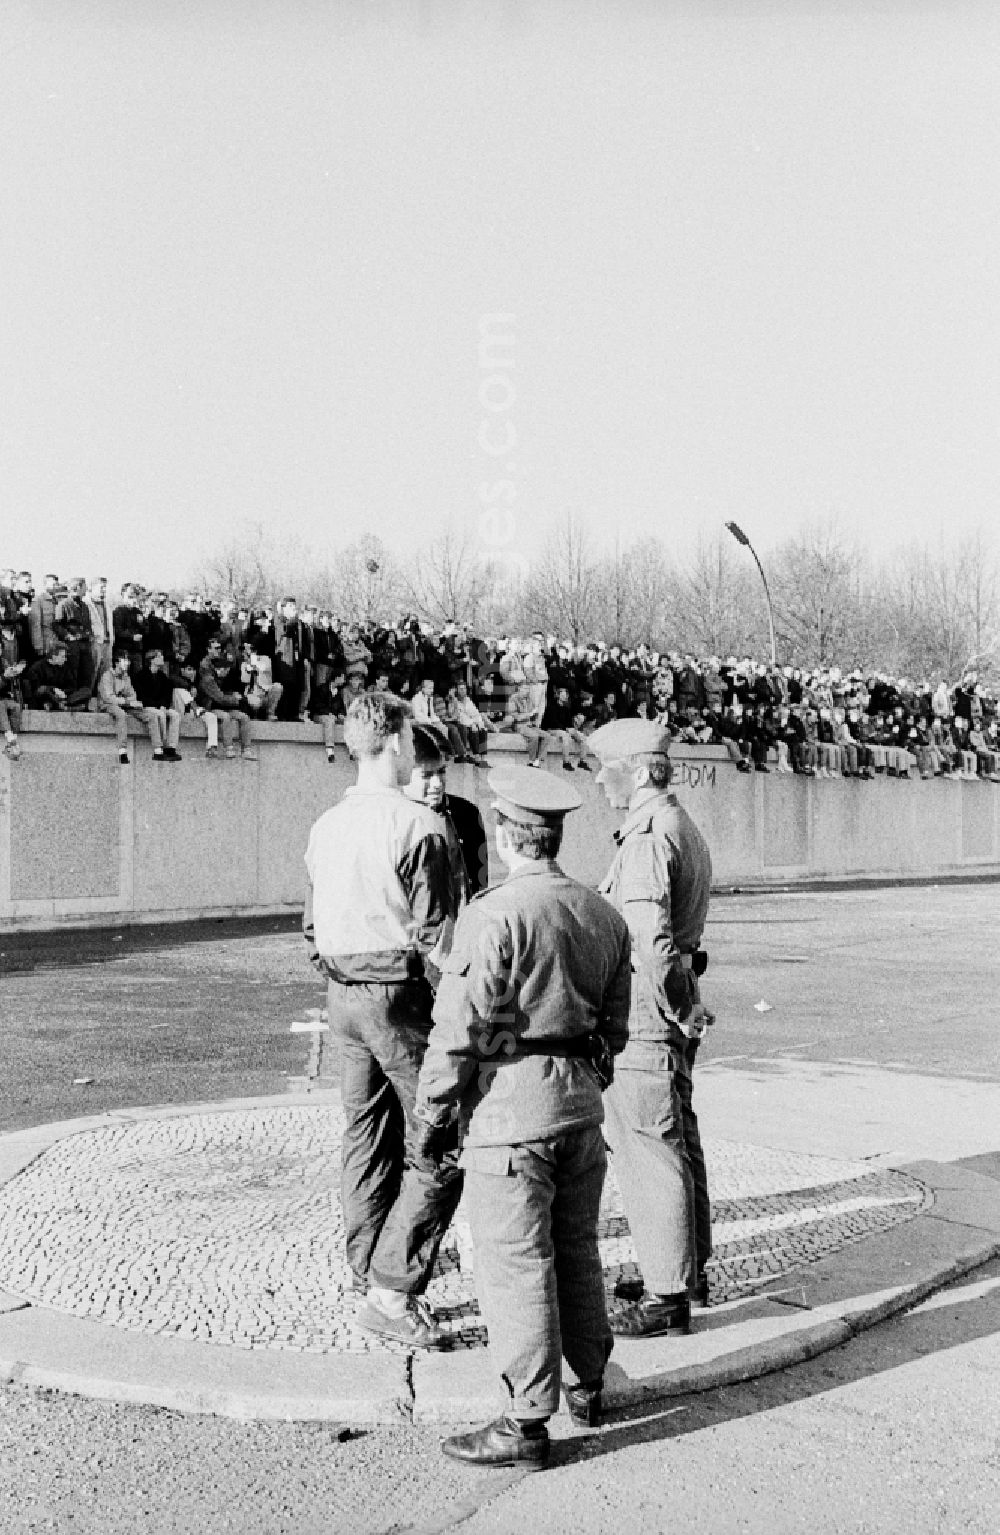 GDR photo archive: Berlin - Occupation of the tank wall at the front of the Brandenburg Gate in Berlin-Mitte. Several hundred people from West Berlin climbed and occupied the meter-high concrete barriers of the GDR border on the square in front of the Berlin landmark under the eyes of onlookers soldiers of the Border Troops of the GDR